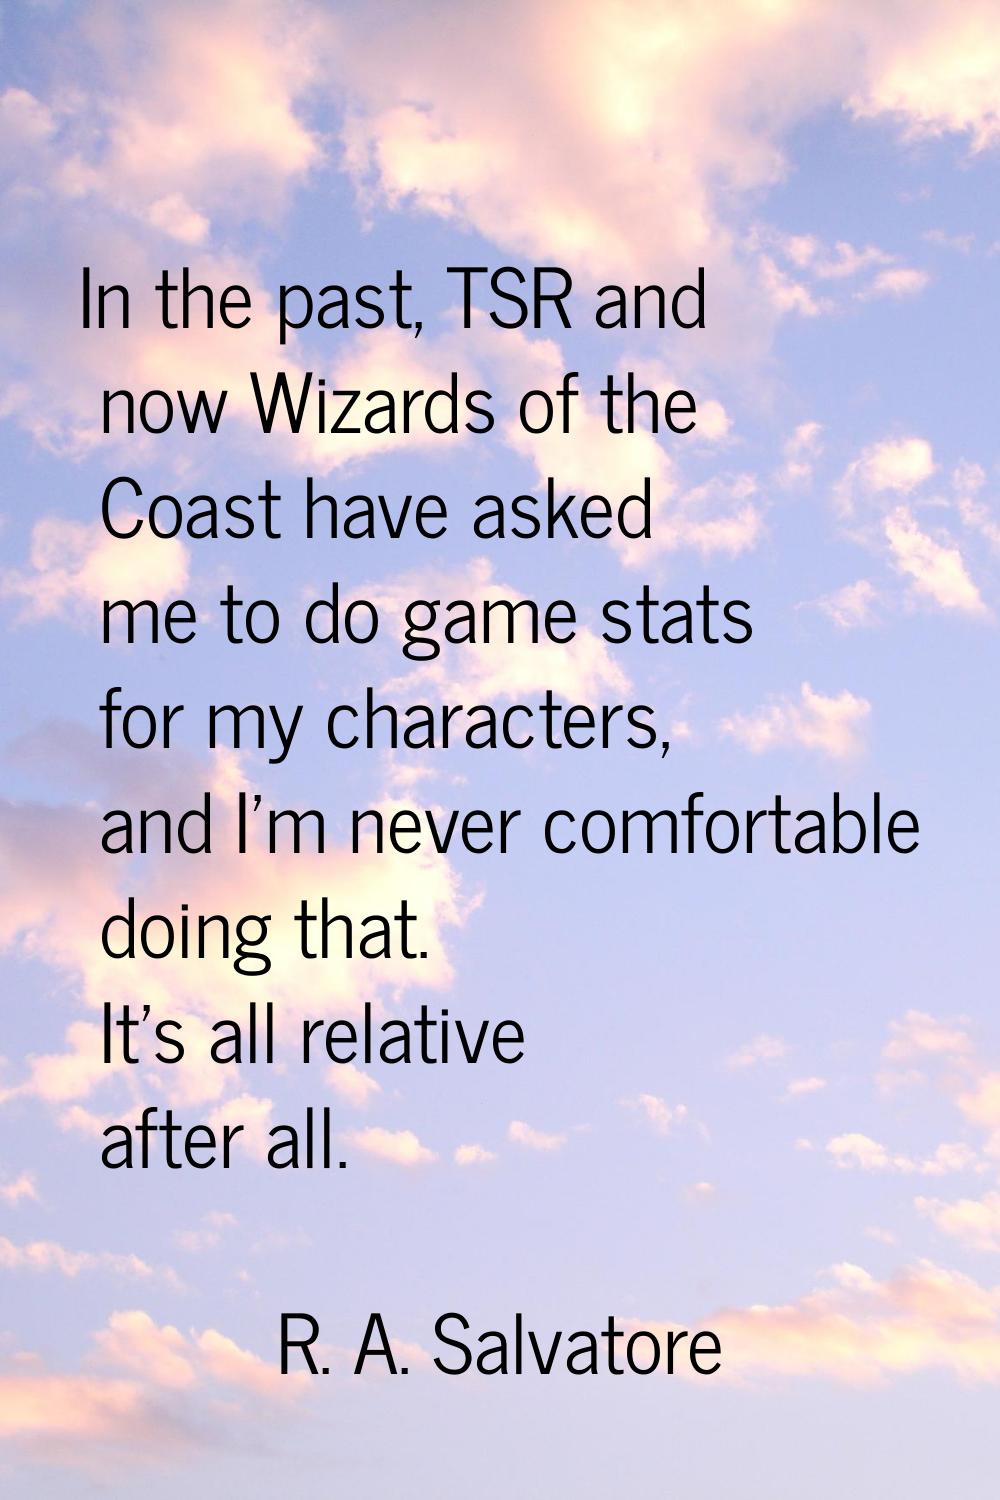 In the past, TSR and now Wizards of the Coast have asked me to do game stats for my characters, and